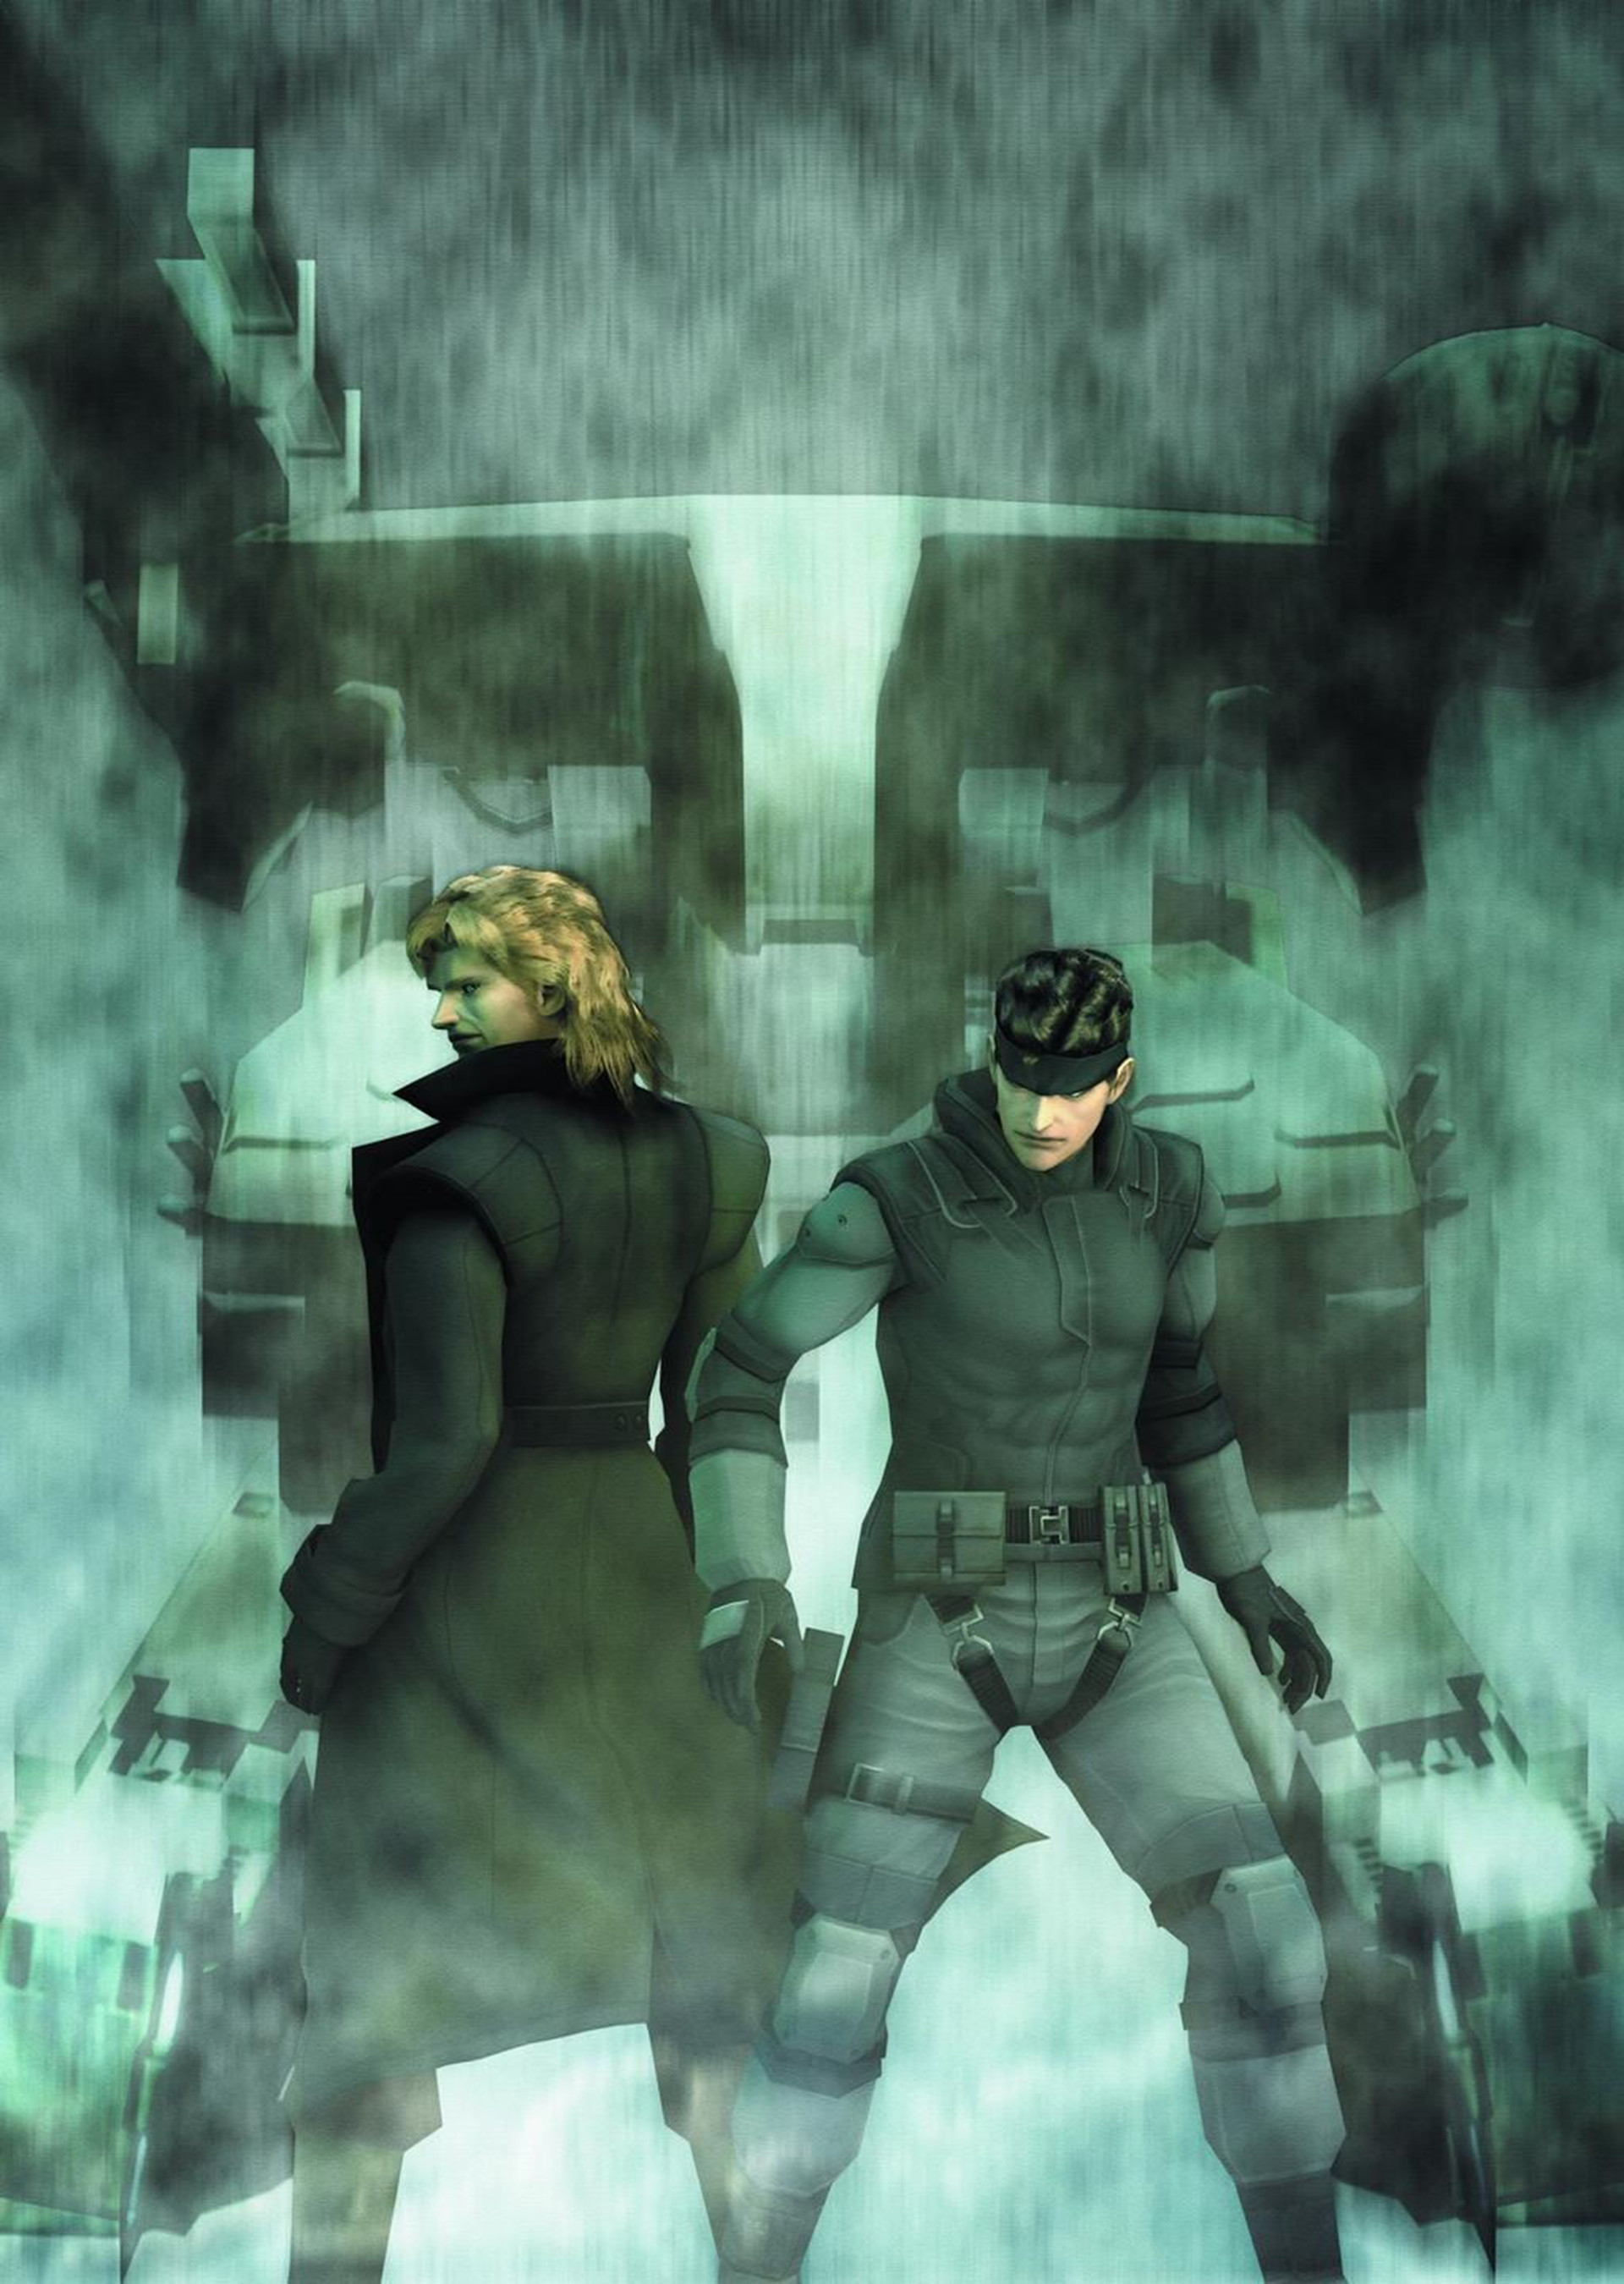 1920x2700 1920x1080 Solid Snake Wallpapers Metal Gear wallpapers